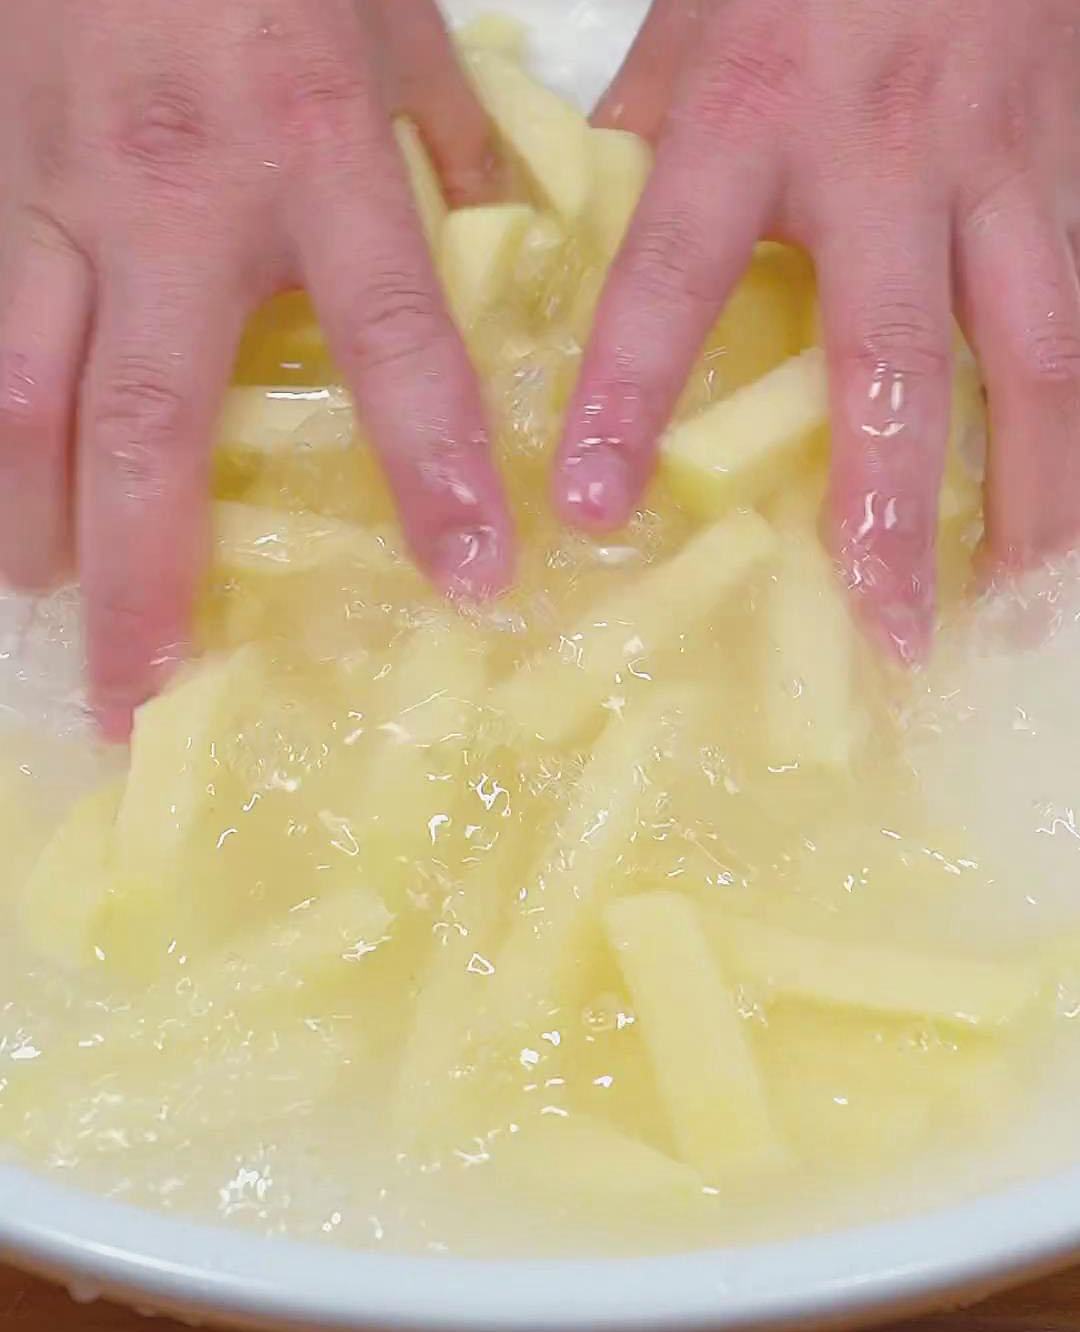 Wash the cut potatoes with water to remove the starch